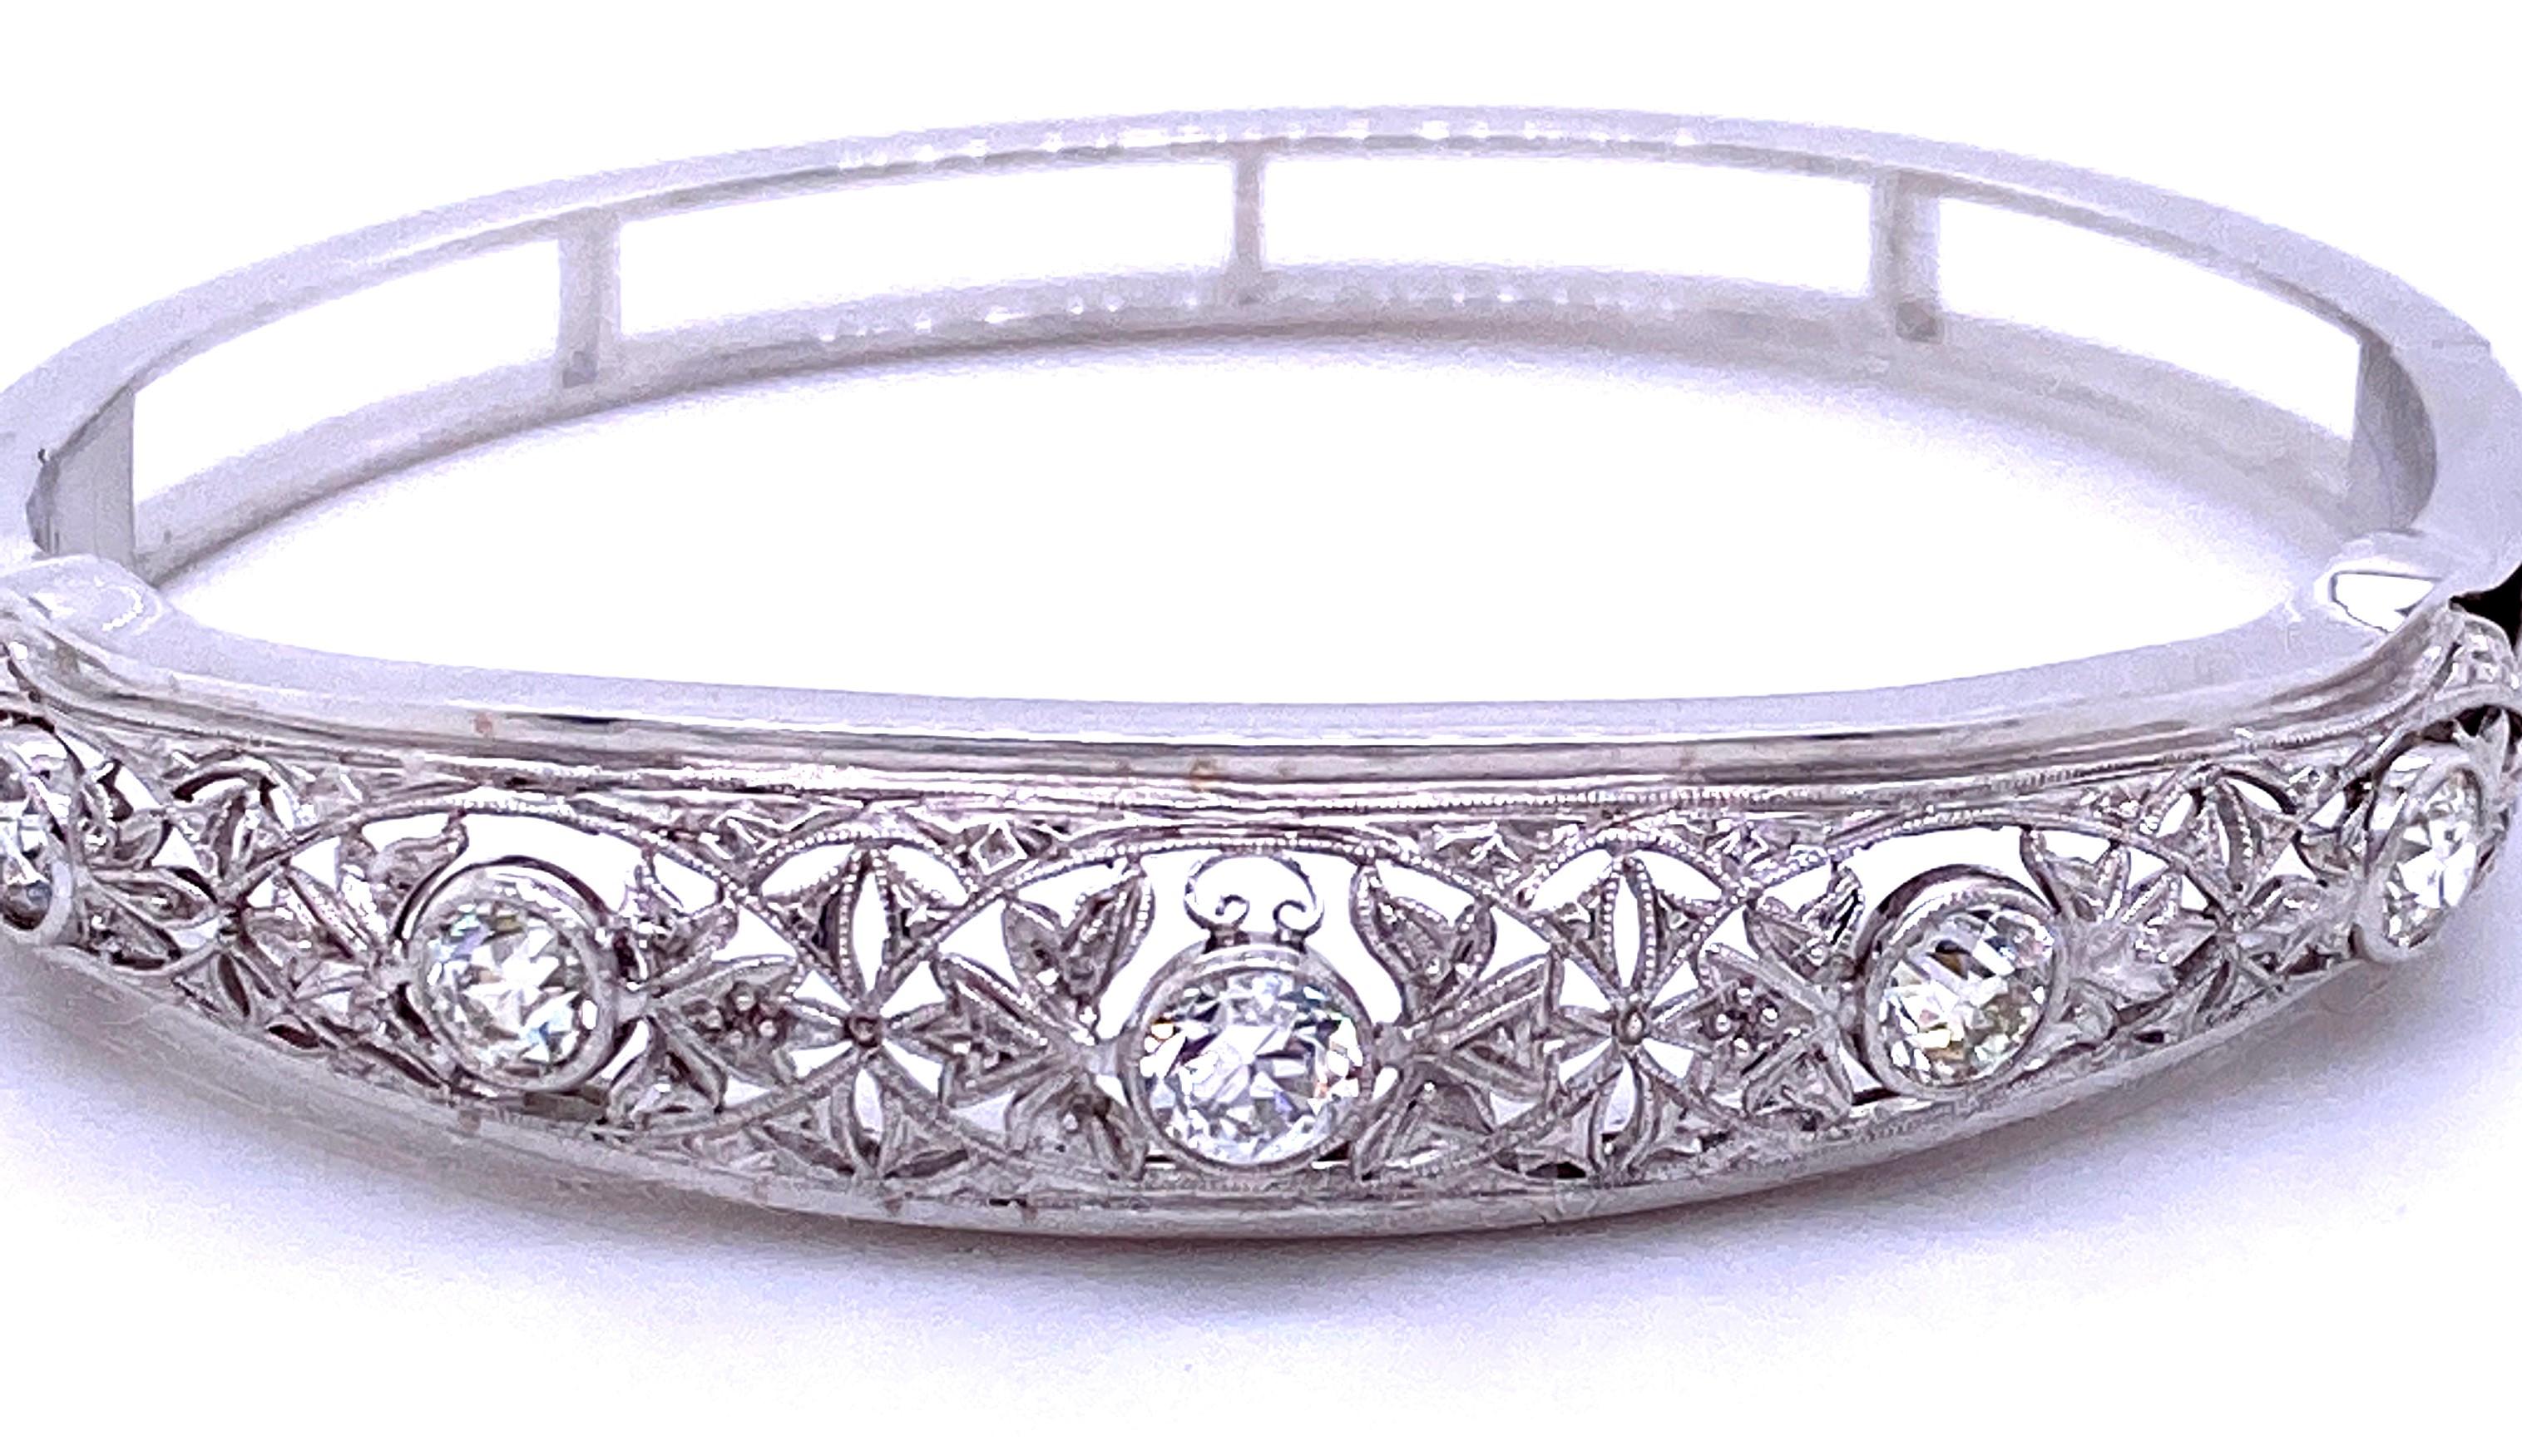 One platinum and 14 karat white gold hinged bangle bracelet featuring a platinum and diamond Edwardian brooch bezel set with five Old Mine cut diamonds, approximately 1.38 carats total weight with matching G/H/I color and VS1-SI2 clarity. The brooch